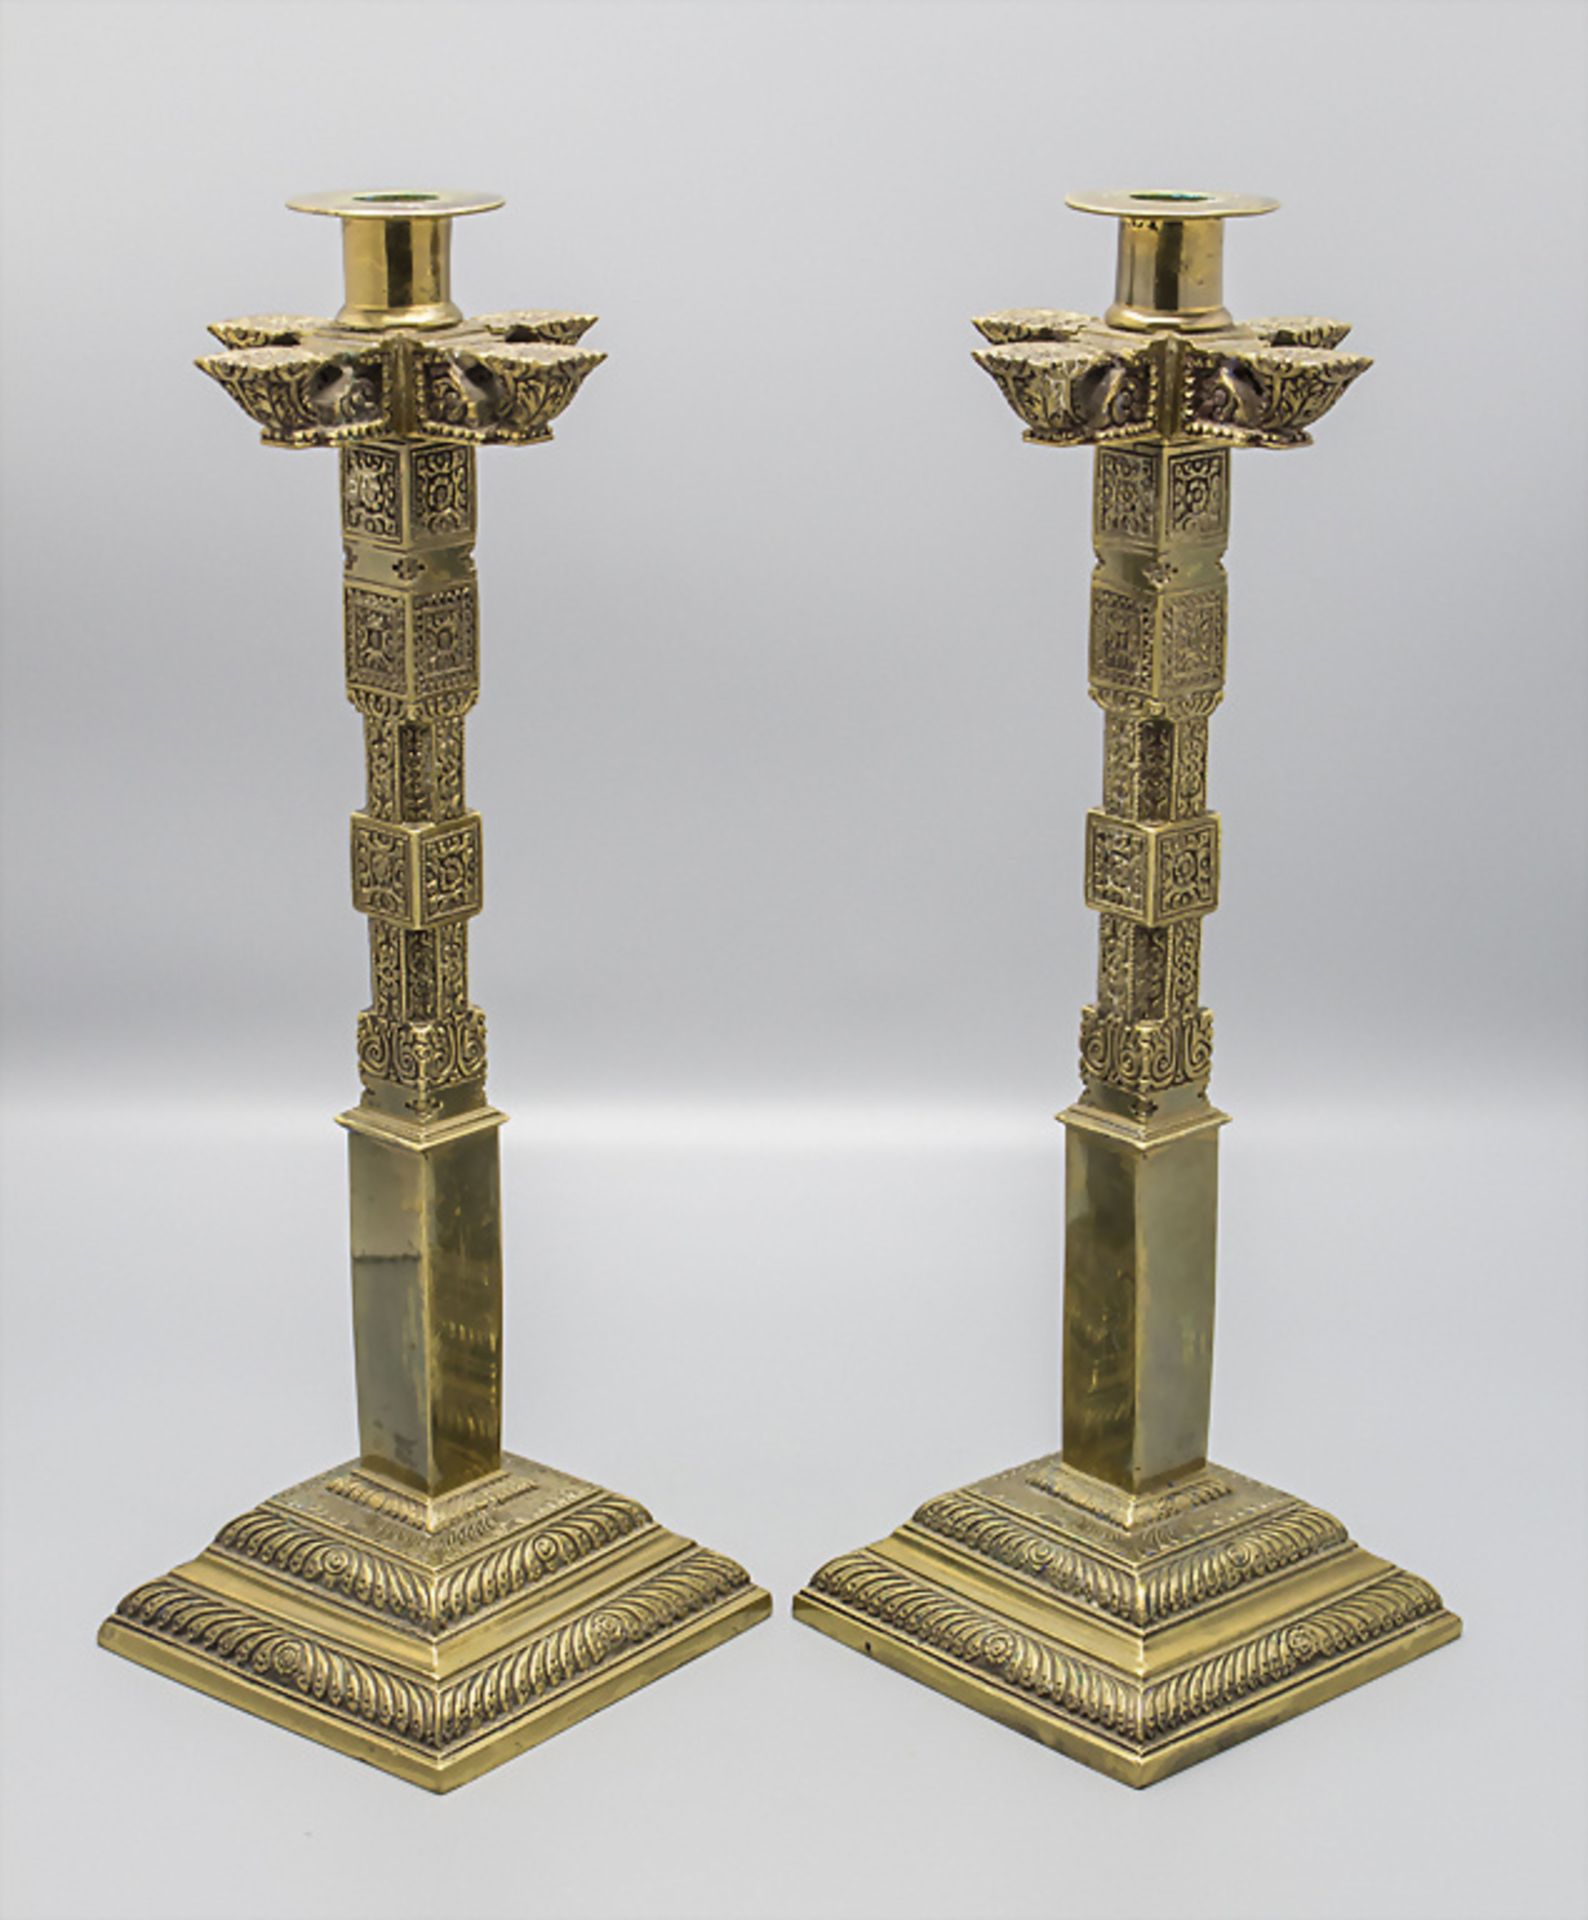 Paar Bronzeleuchter / A pair of bronze candle holders, wohl 19. Jh. - Image 2 of 4